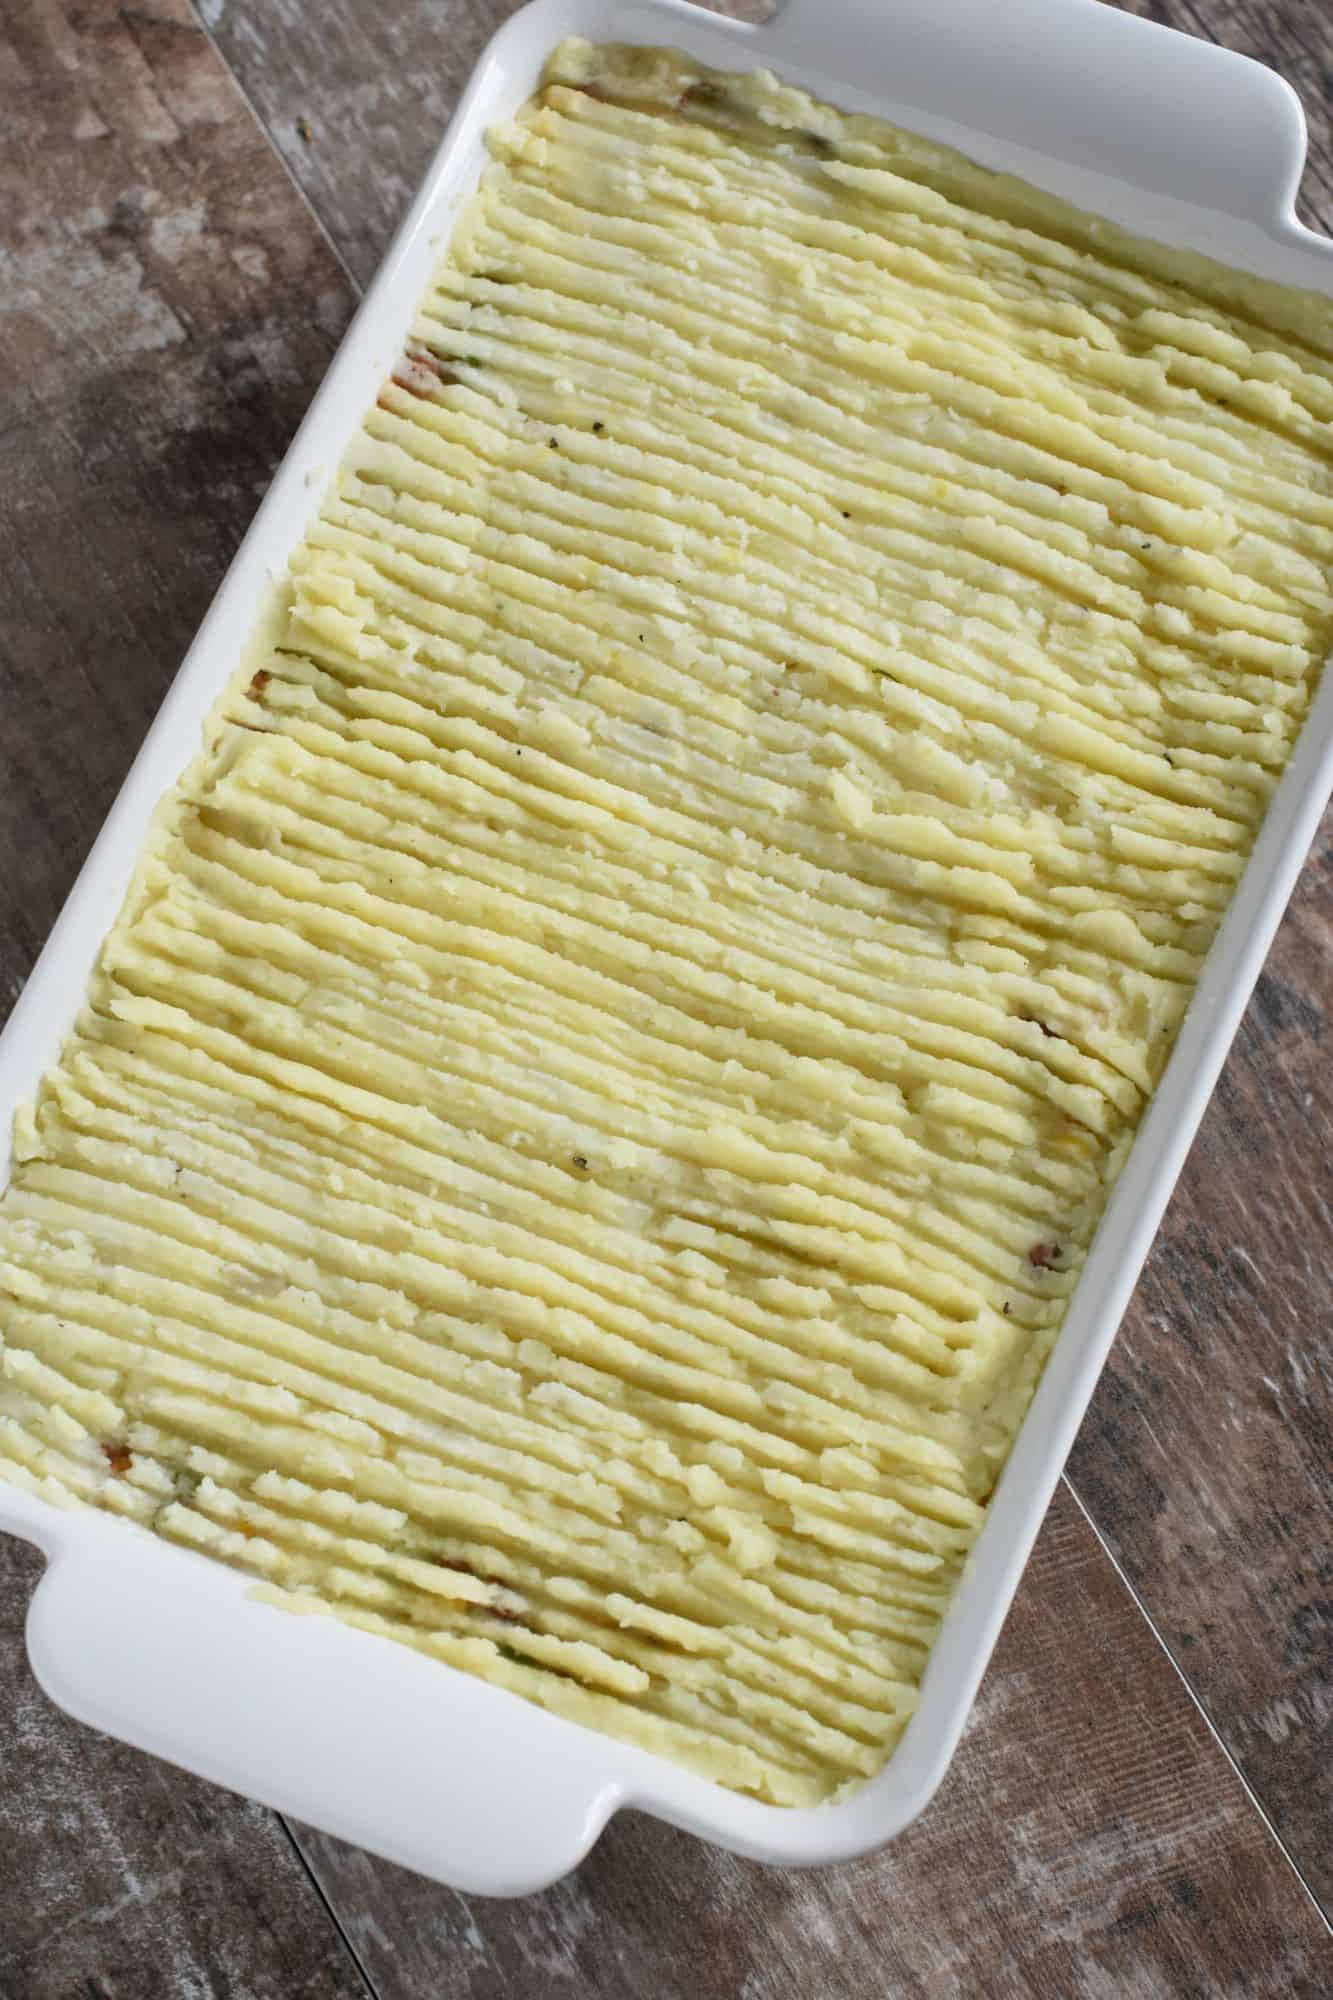 fork ridges in the layer of mashed potatoes